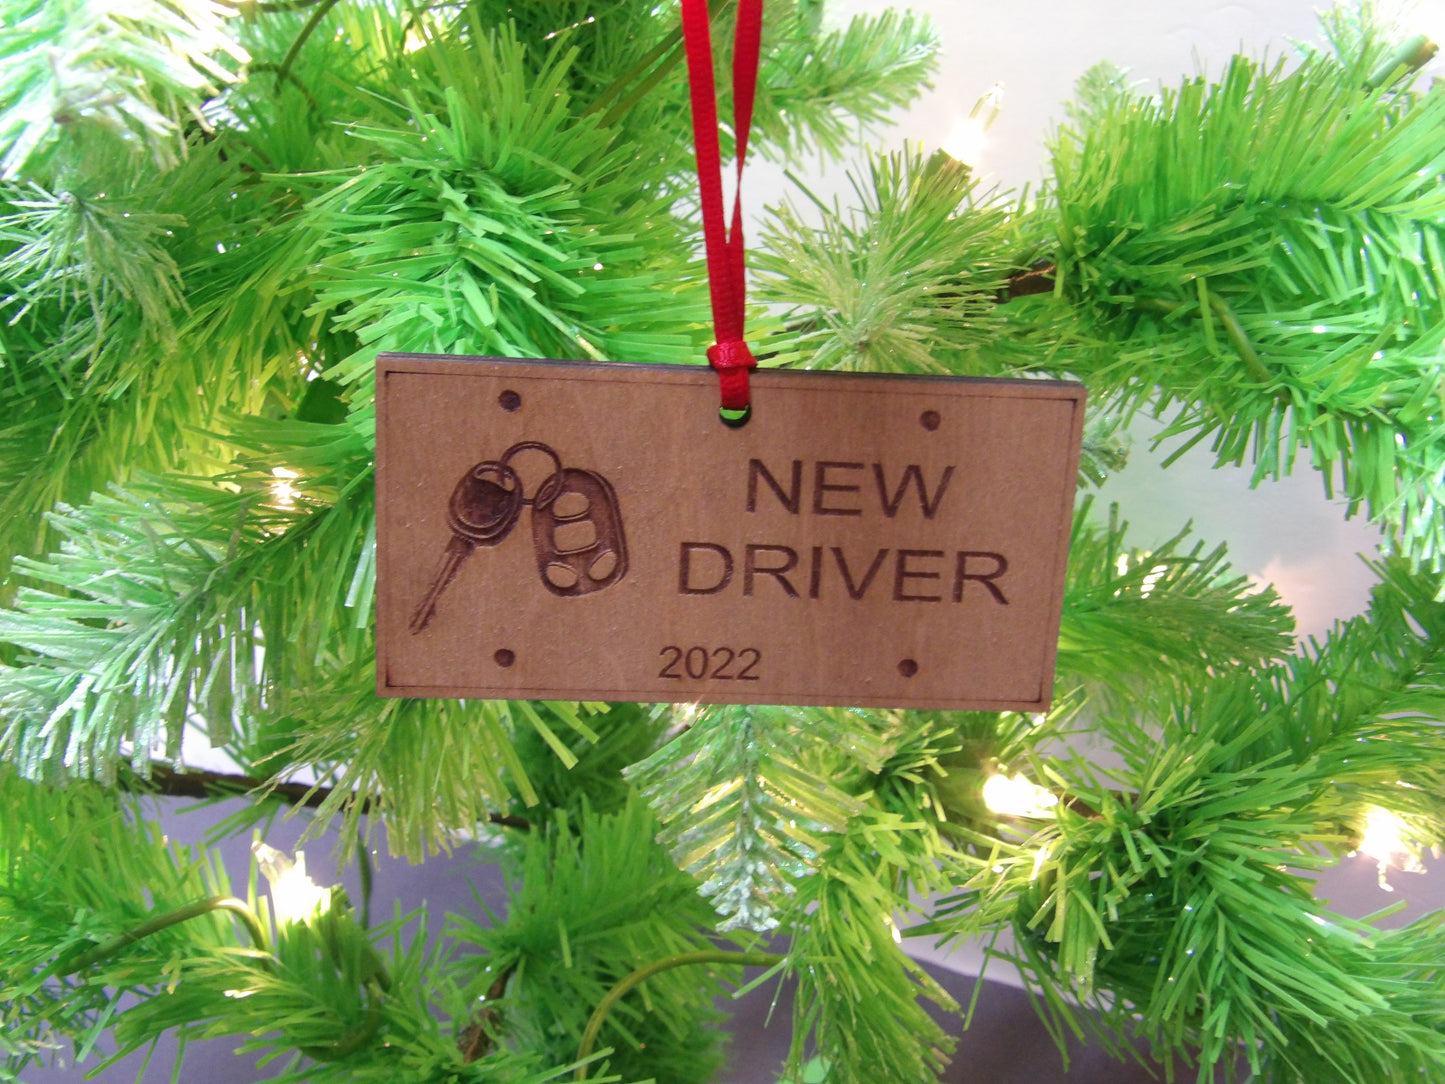 New Driver License Plate Wooden Christmas Tree Ornament